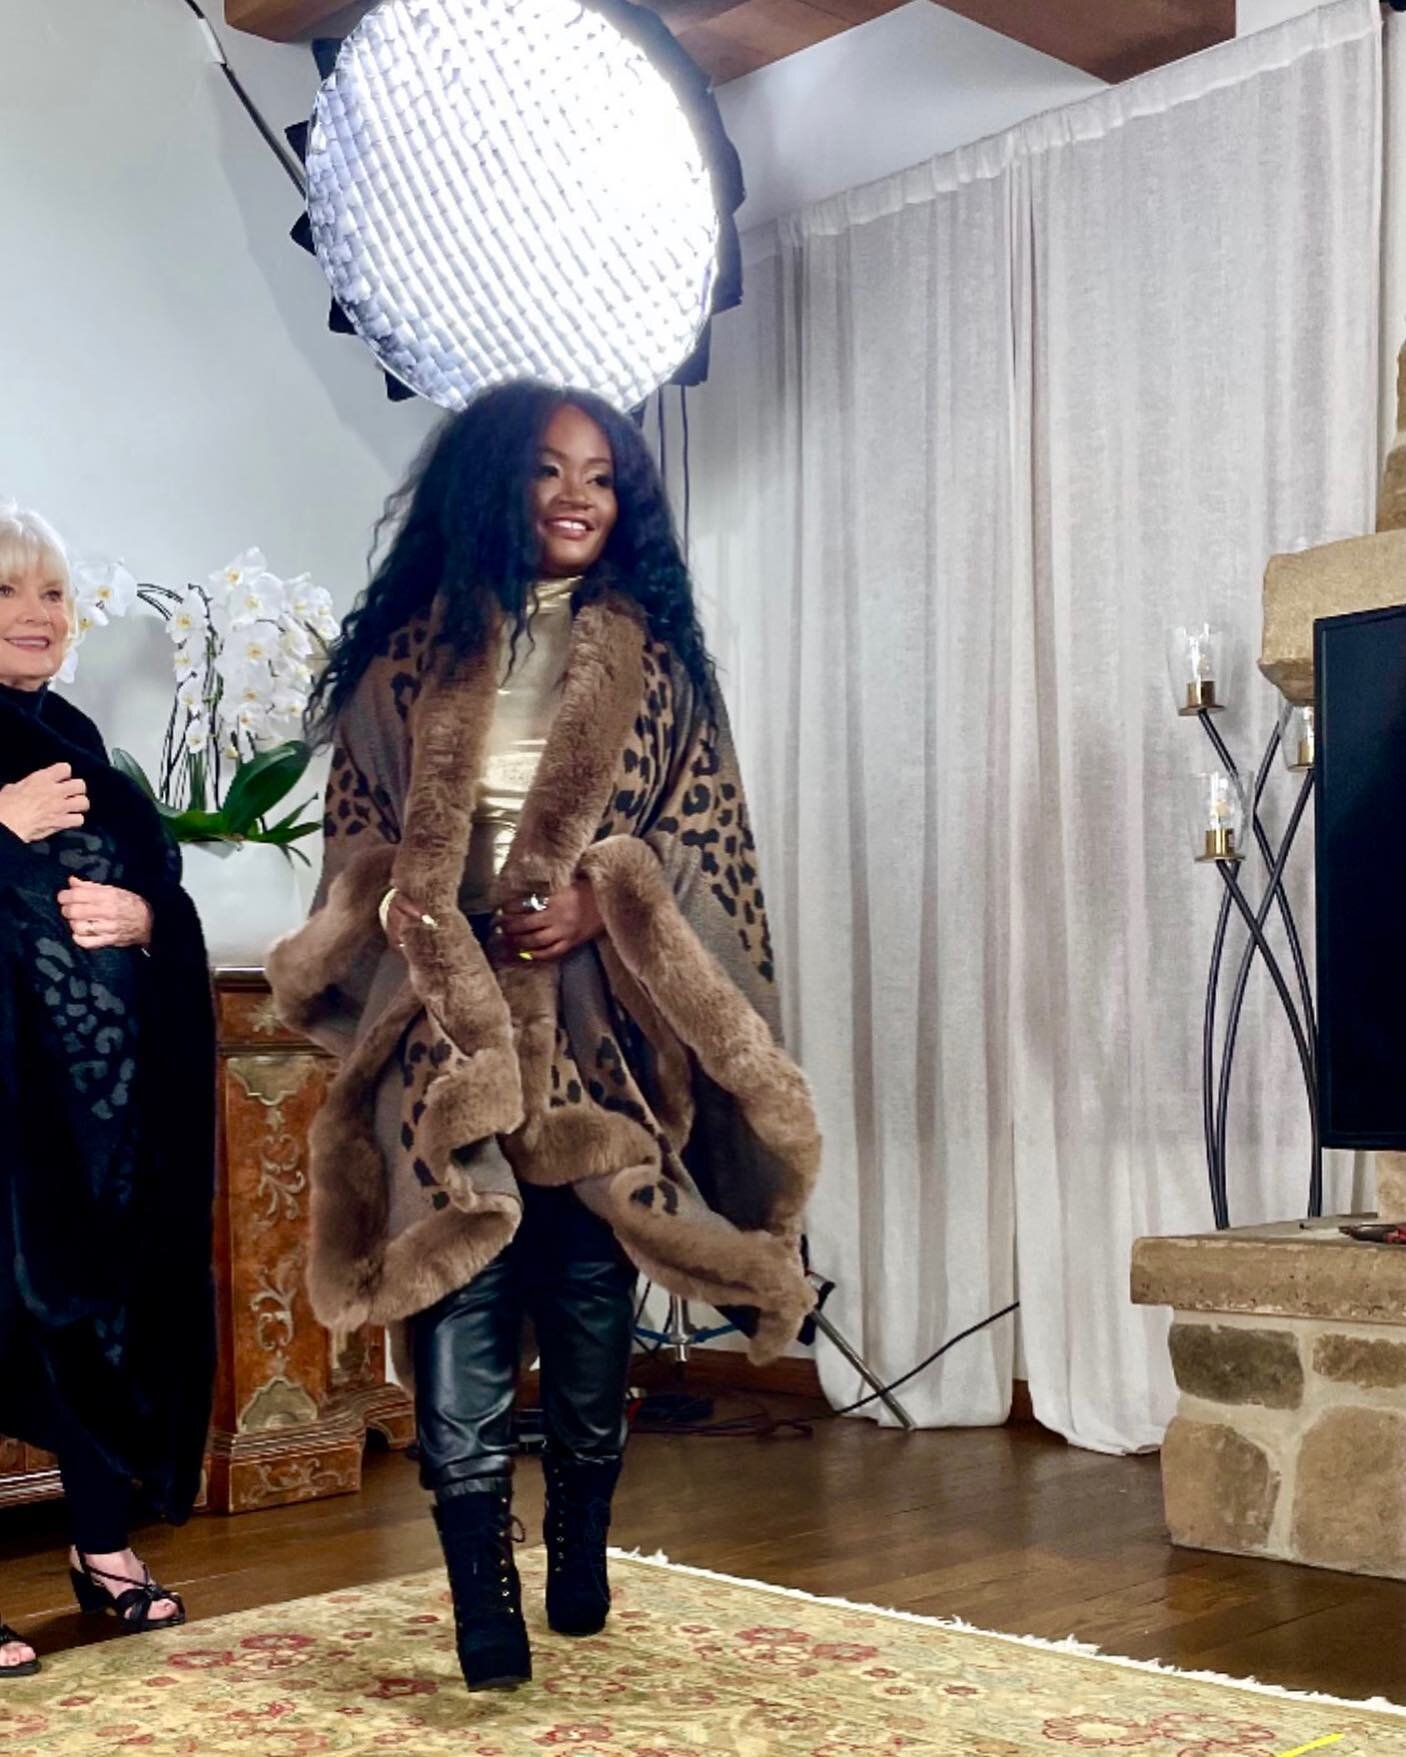 Me showing up to your Thanksgiving dinner today in this luxury faux fur cape from. @kathyireland Kathy Ireland Fashion 360 &hellip;like what you cooking and what you grateful for? Y&rsquo;all know Thanksgiving is my favorite holiday! 
#capes #happyth